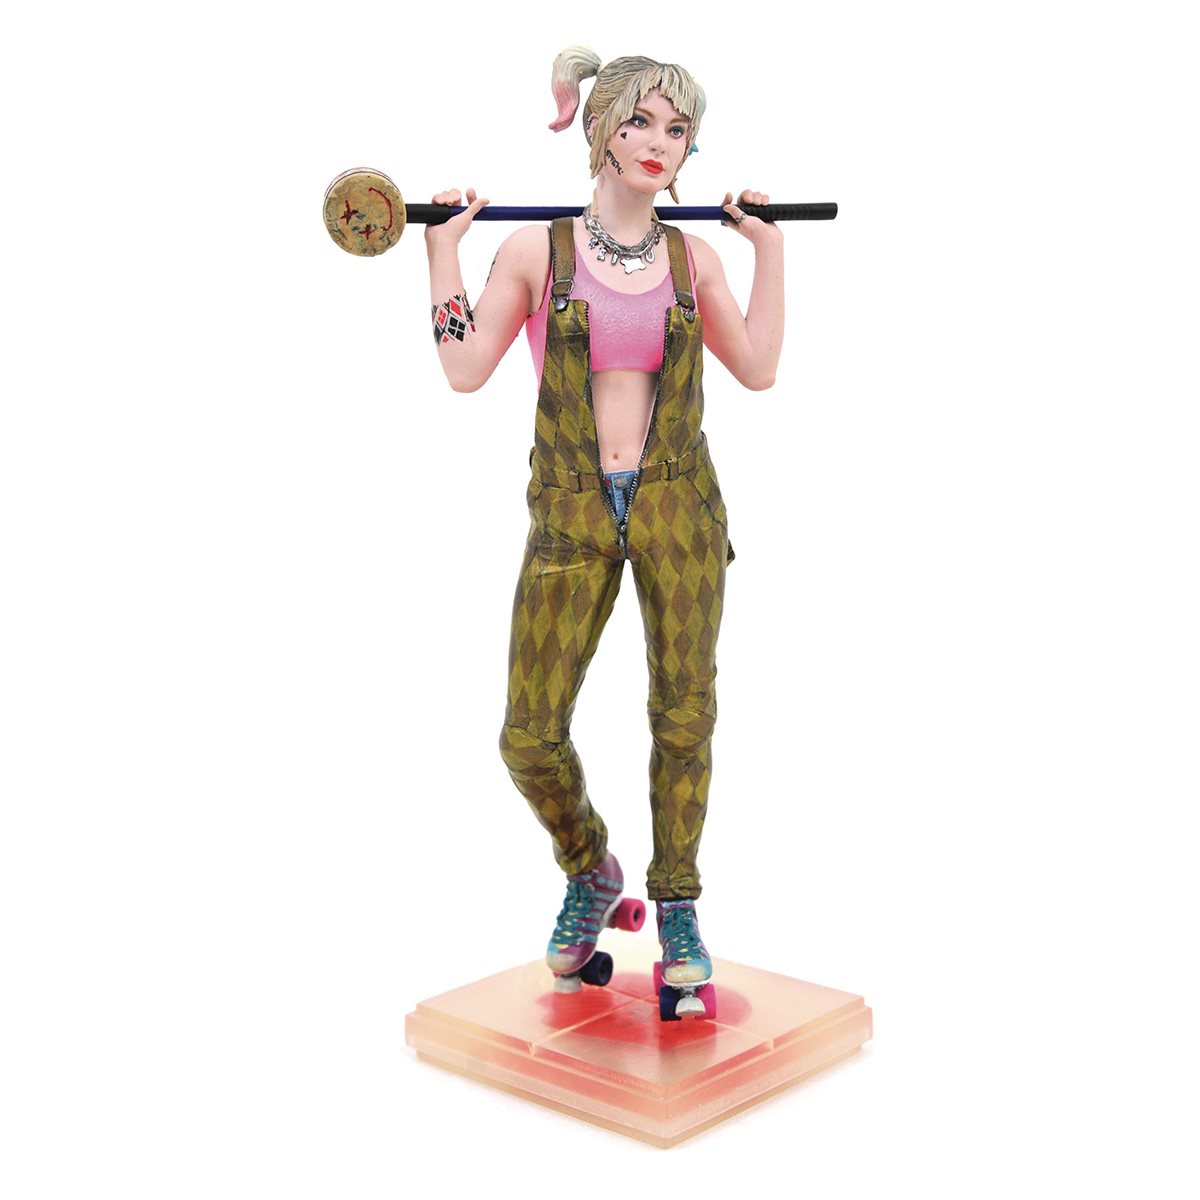 DC Movie Gallery Suicide Squad Harley Quinn Statue